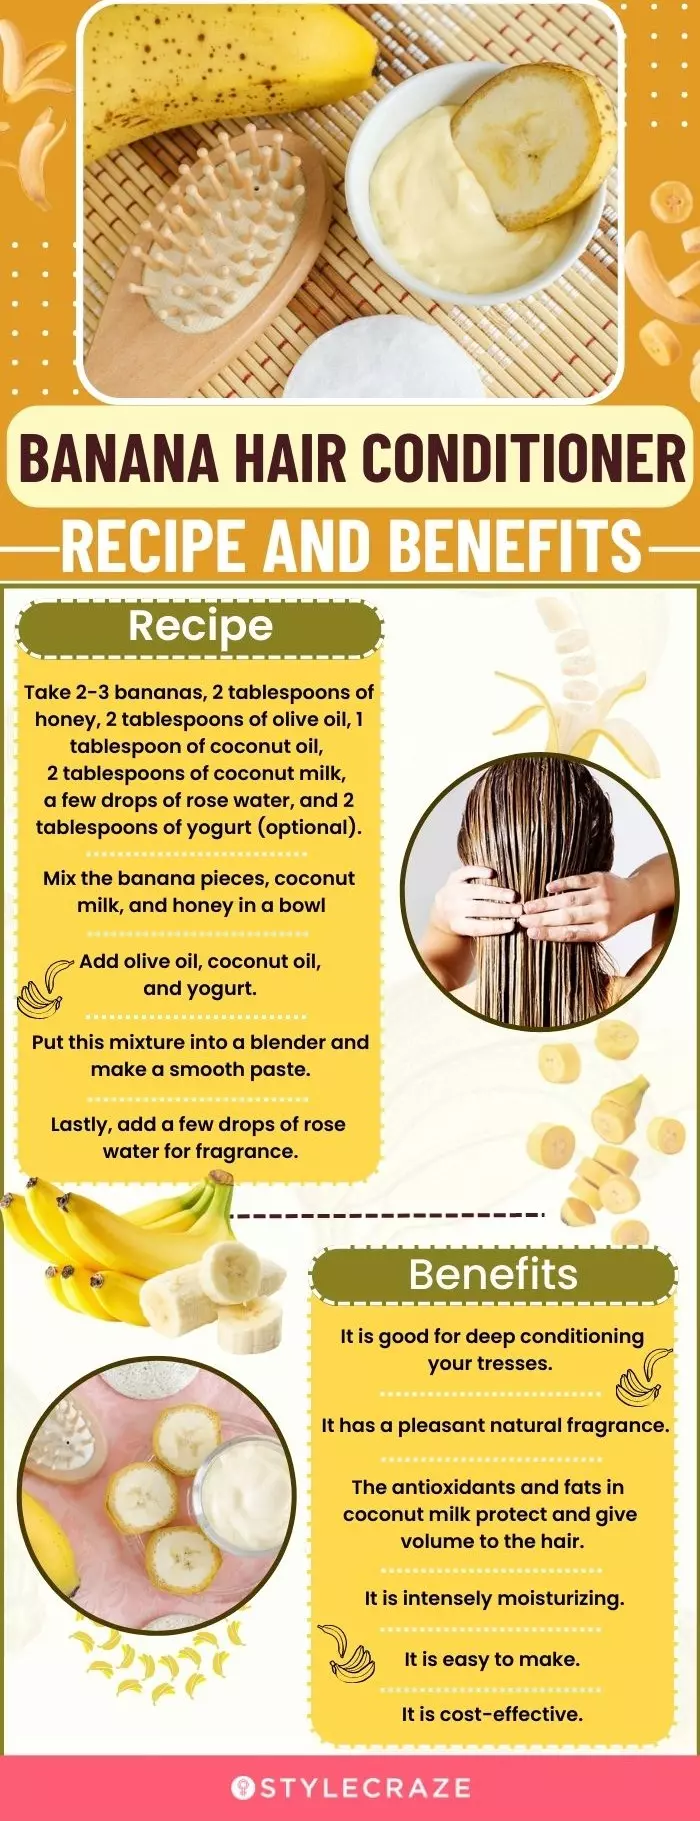 banana hair conditioner recipe and benefits (infographic)